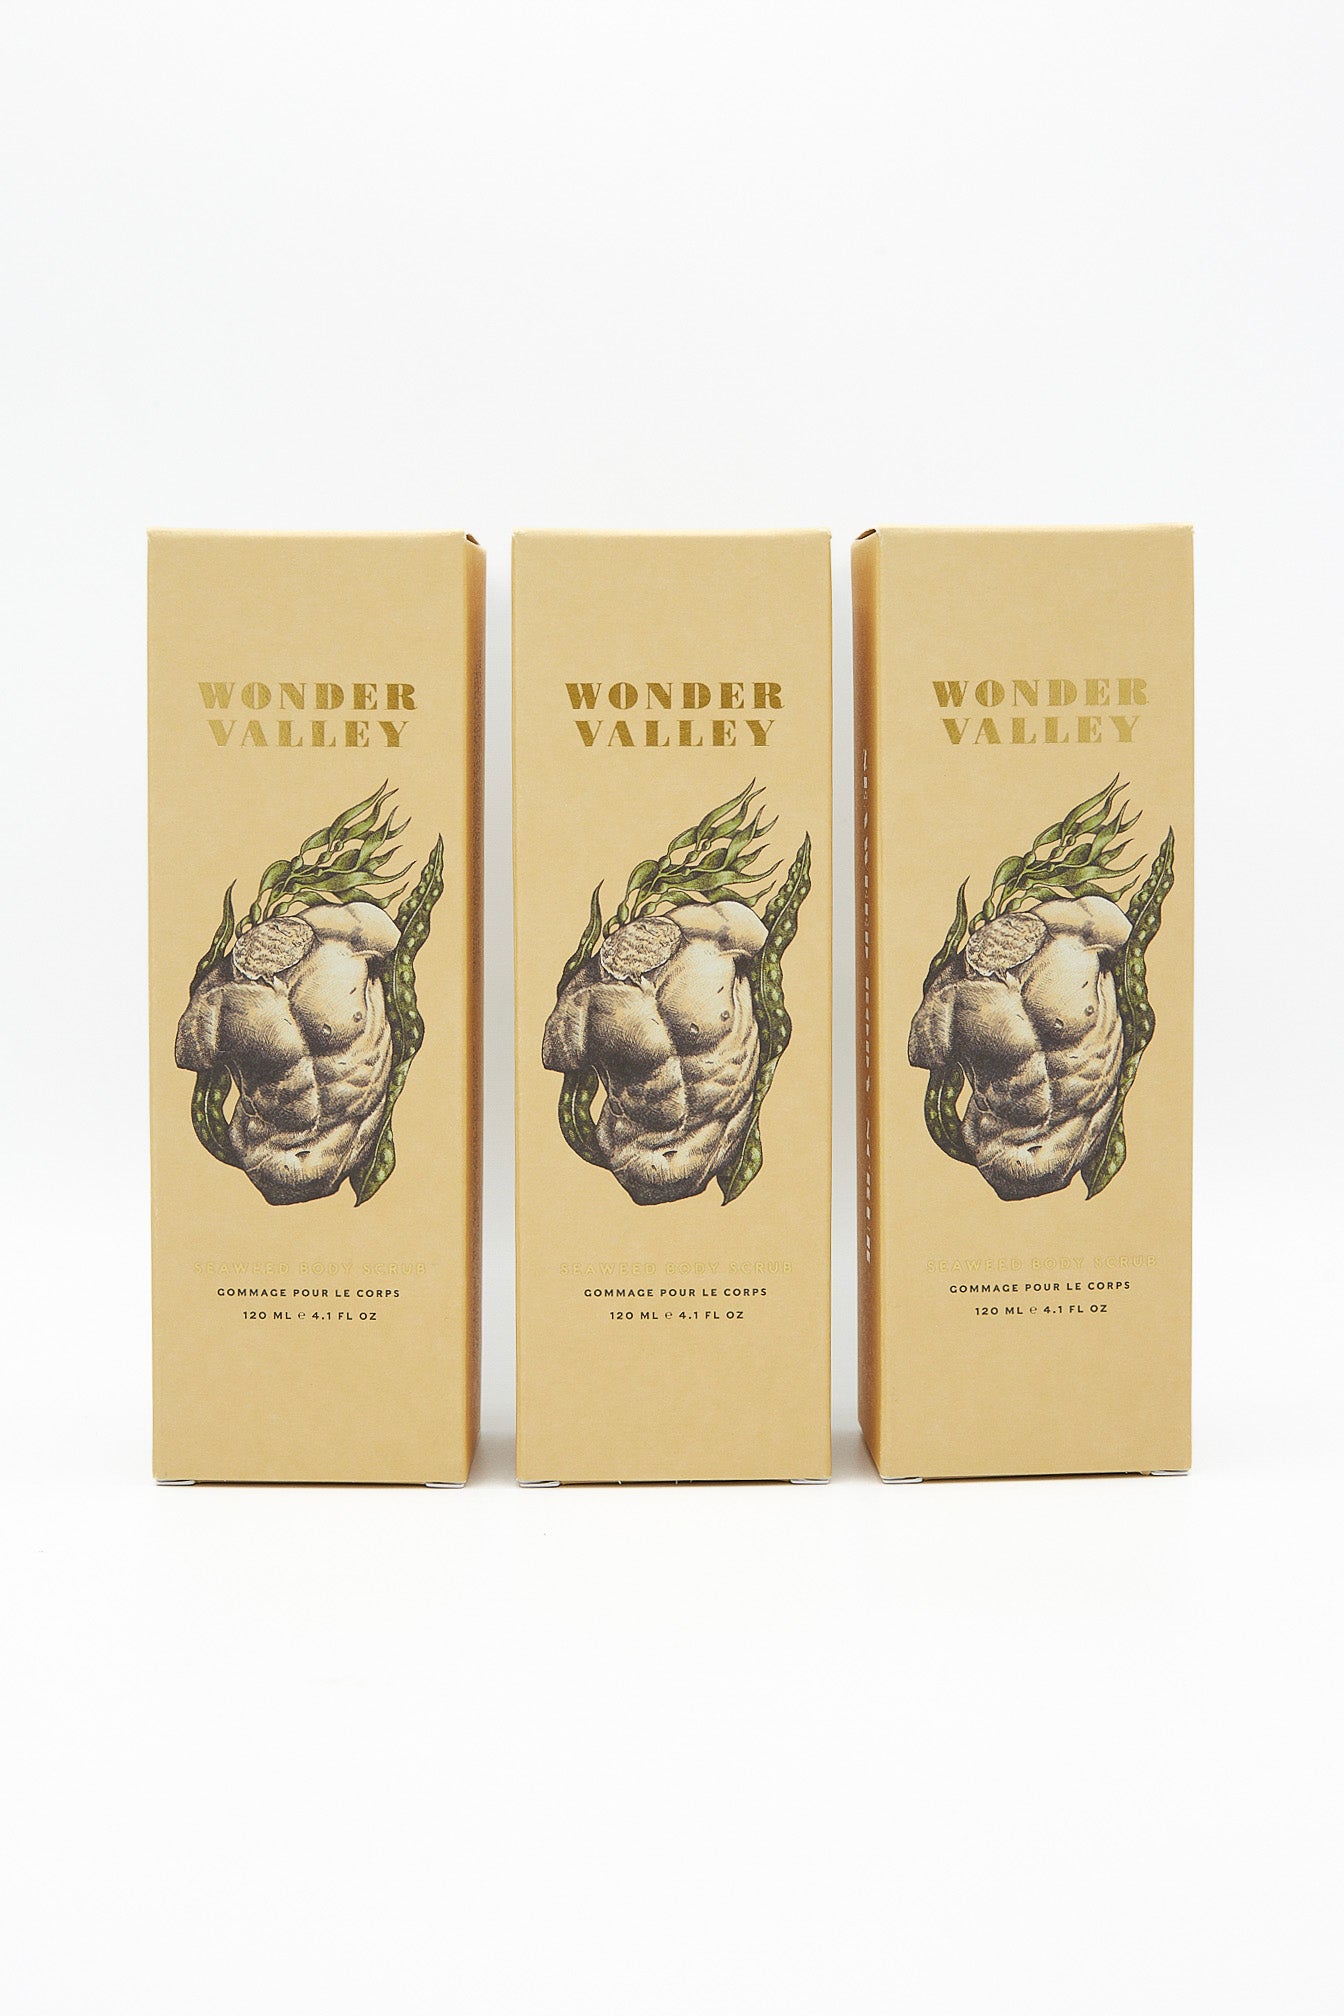 Three boxes featuring a woman showcasing the benefits of Wonder Valley Seaweed Body Scrub that exfoliates and detoxifies.